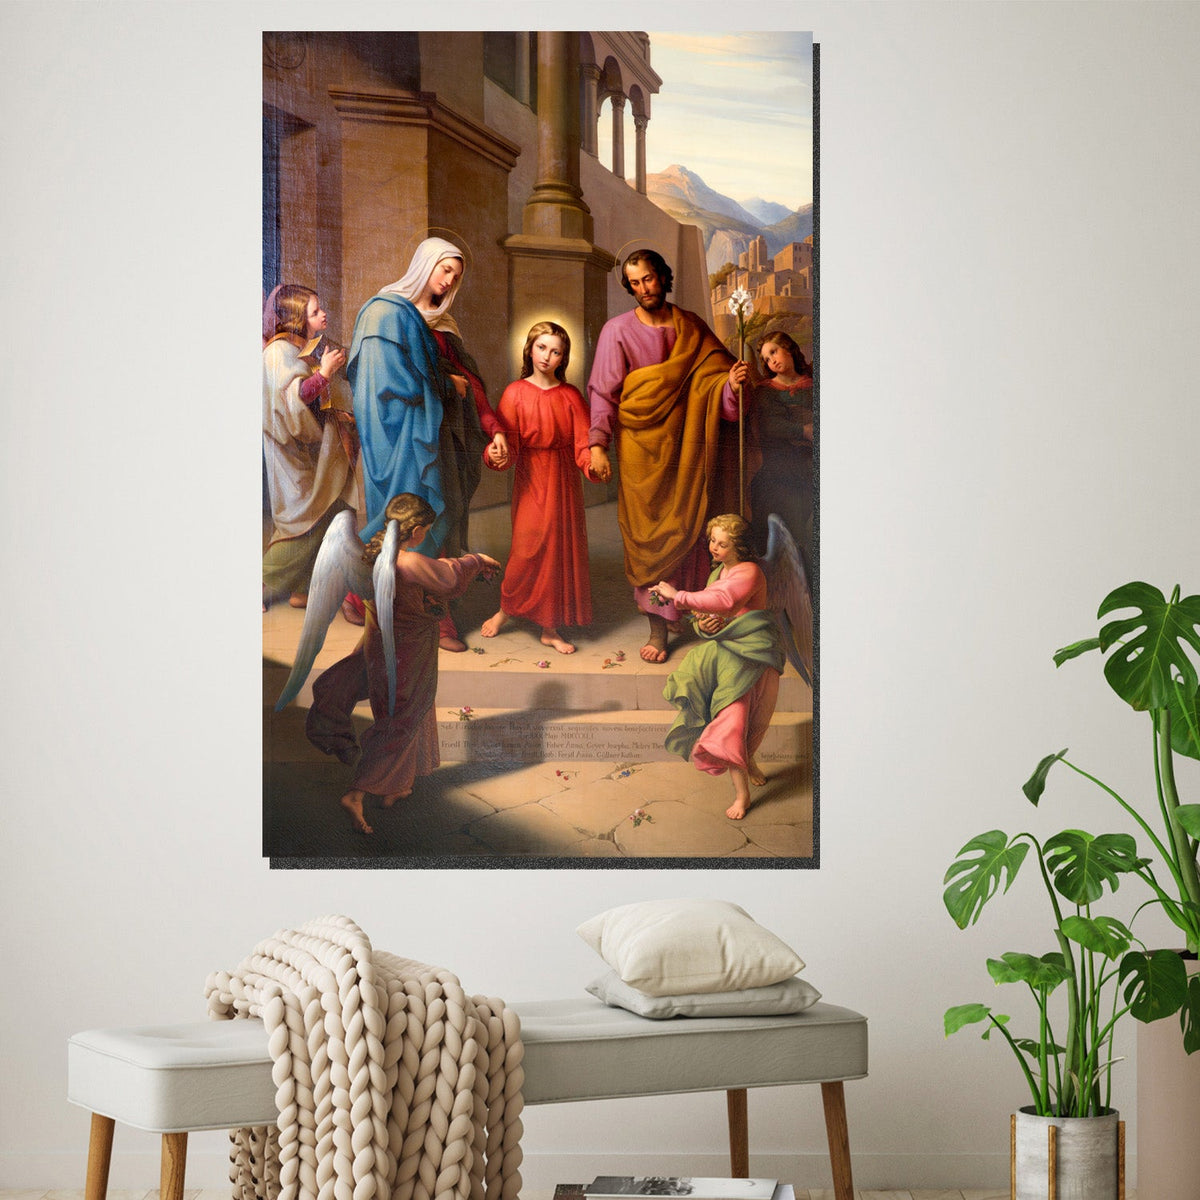 https://cdn.shopify.com/s/files/1/0387/9986/8044/products/TheHolyFamilyCanvasArtprintStretched-2.jpg